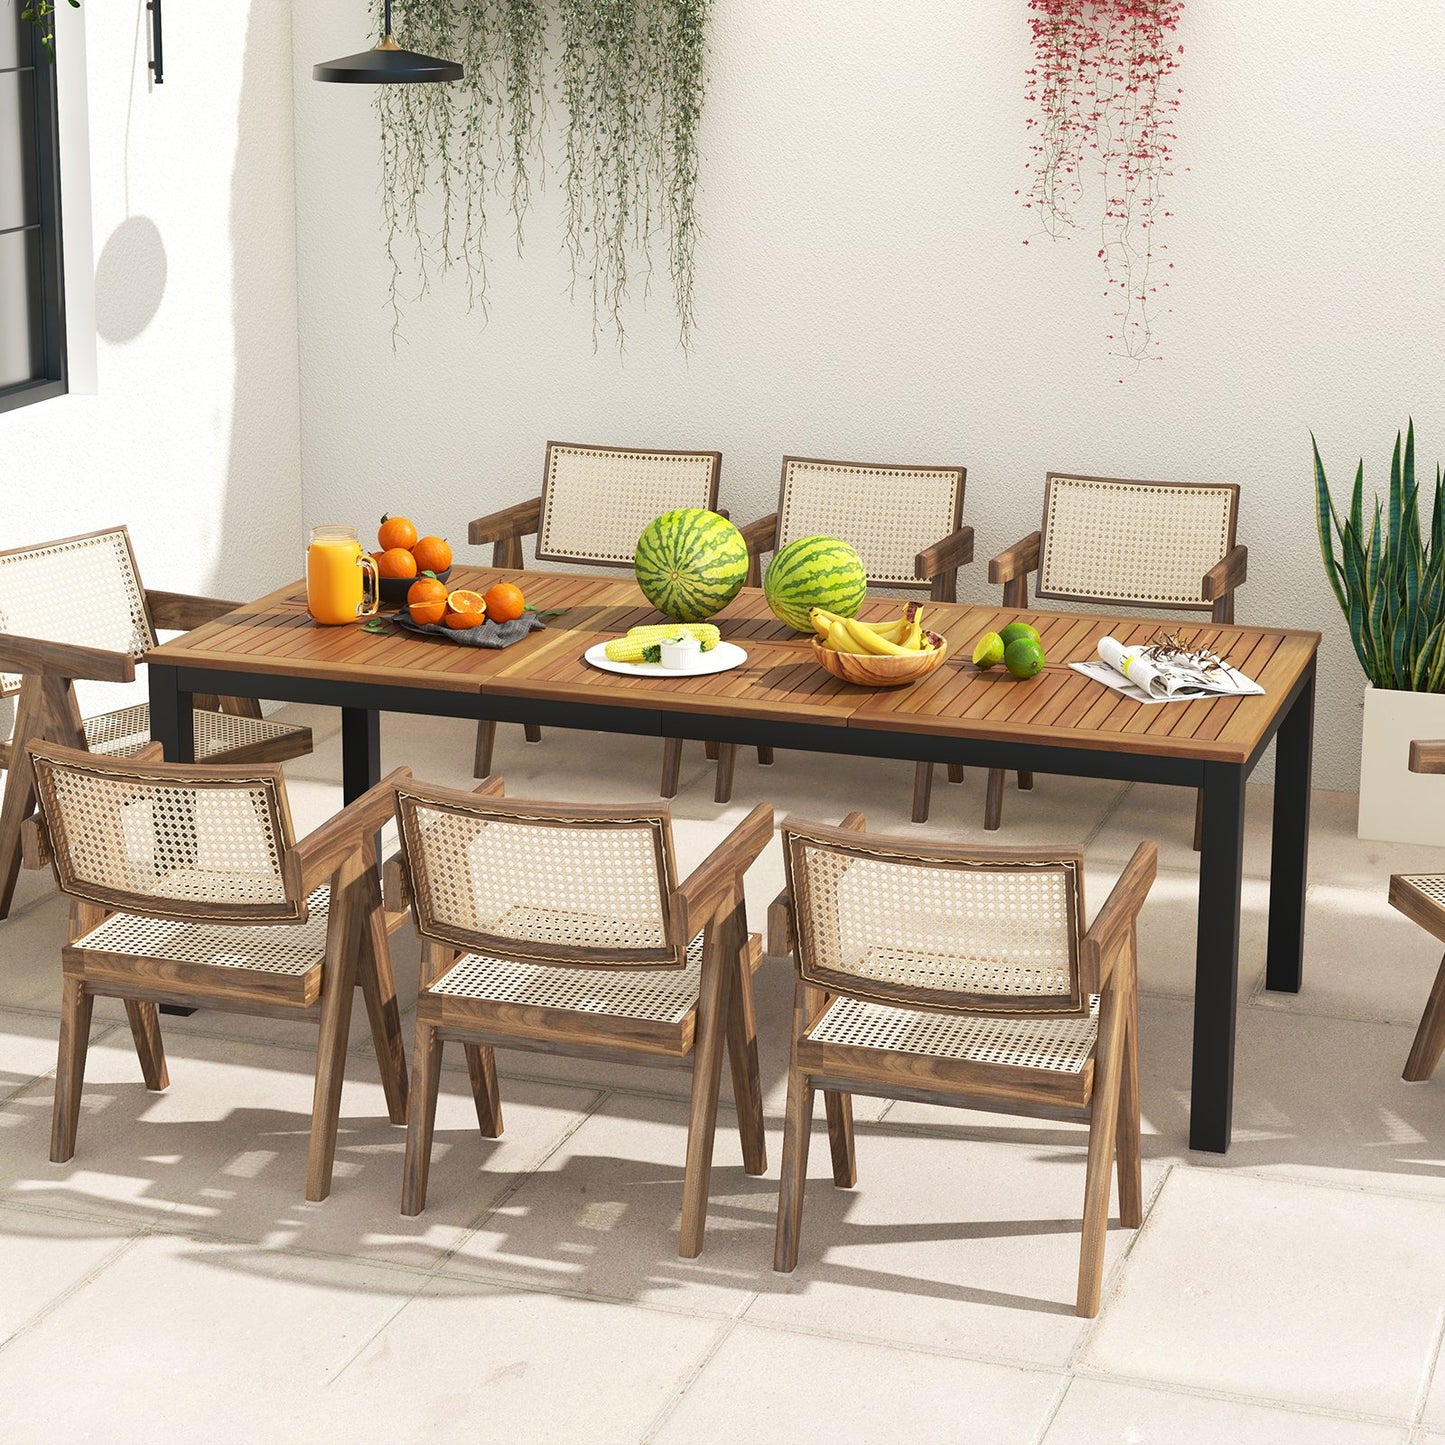 8-Person Outdoor Dining Table 79 Inch Acacia Wood Patio Table with Umbrella Hole, Natural